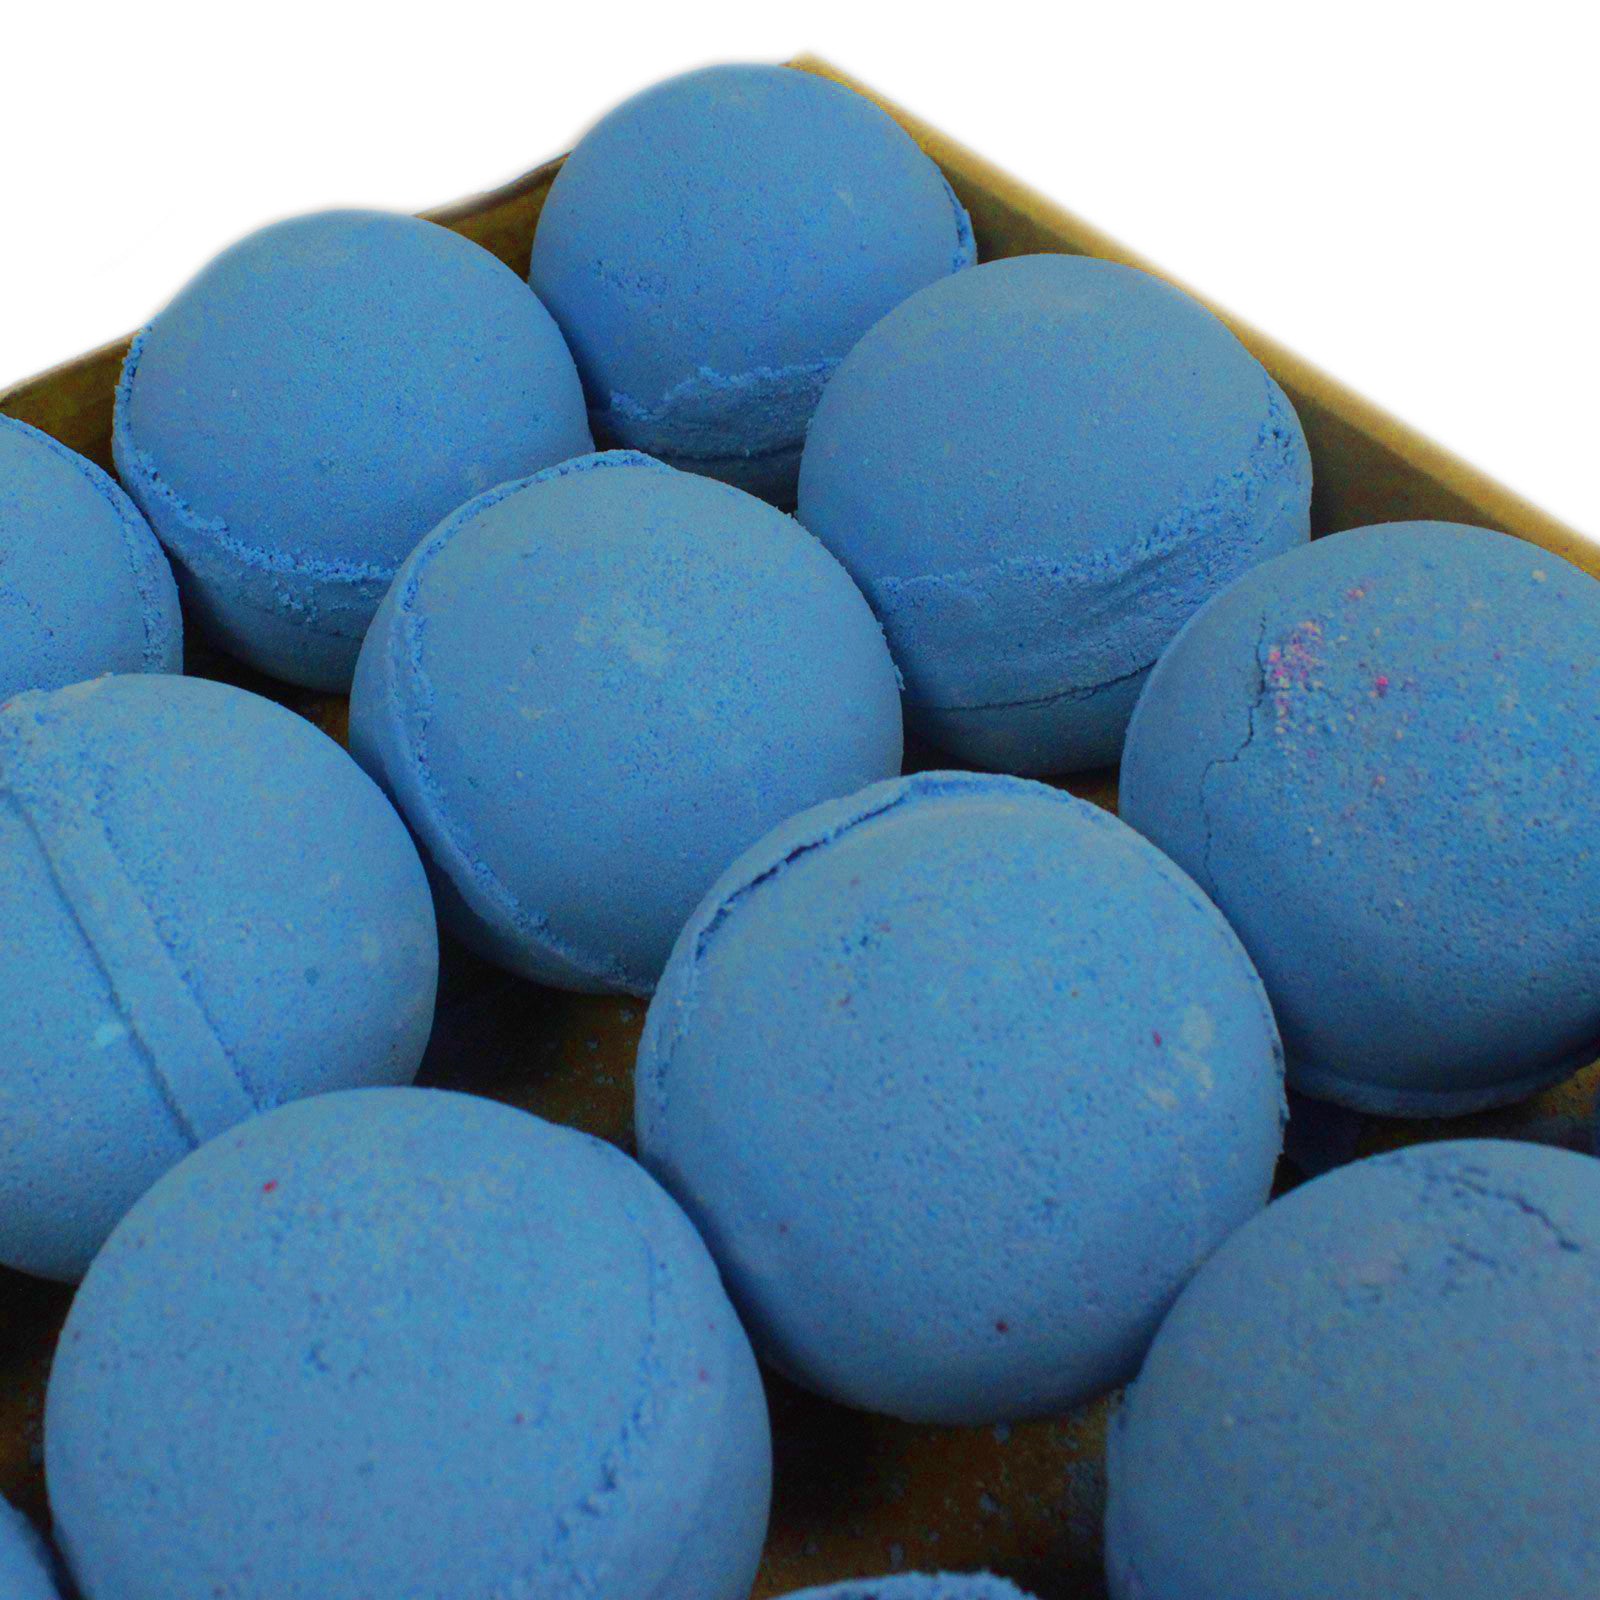 A close-up of blue macarons arranged tightly together, evoking the masculine scent of Texas Dewberry Jumbo Bath Bomb from The Soap Gal x.